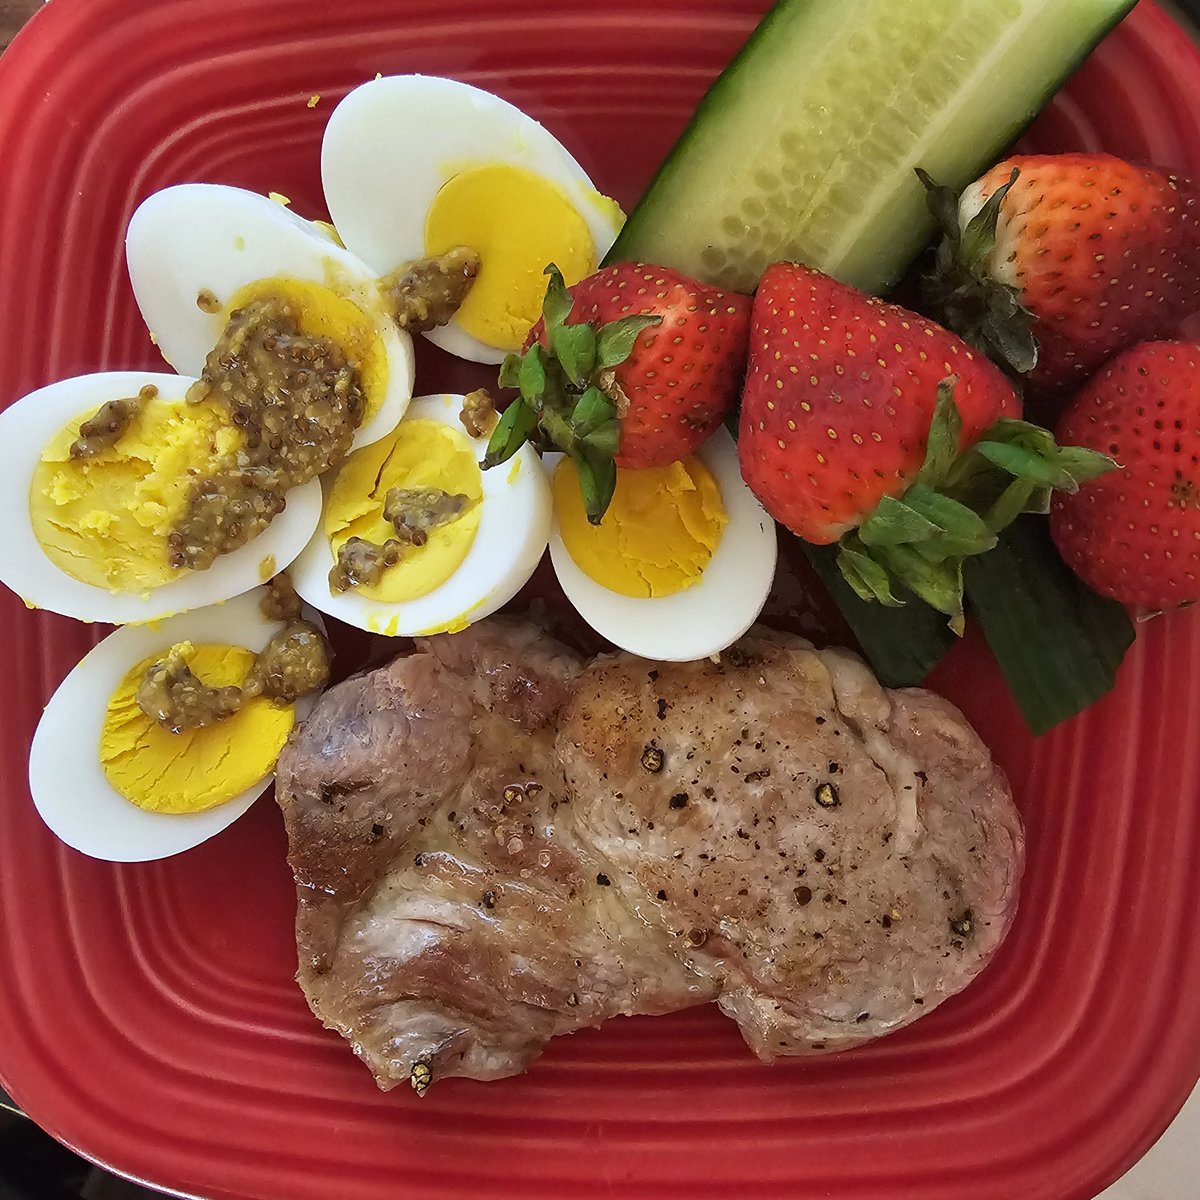 Pork sirloin with hard boiled eggs, and cucumber. 

My strawberries were going bad, I decided to use them up. 

(Also, your body is NOT a trash can, it's ok to let food go bad and throw it away)

#Ketoliving
#Ketovore
#lchf